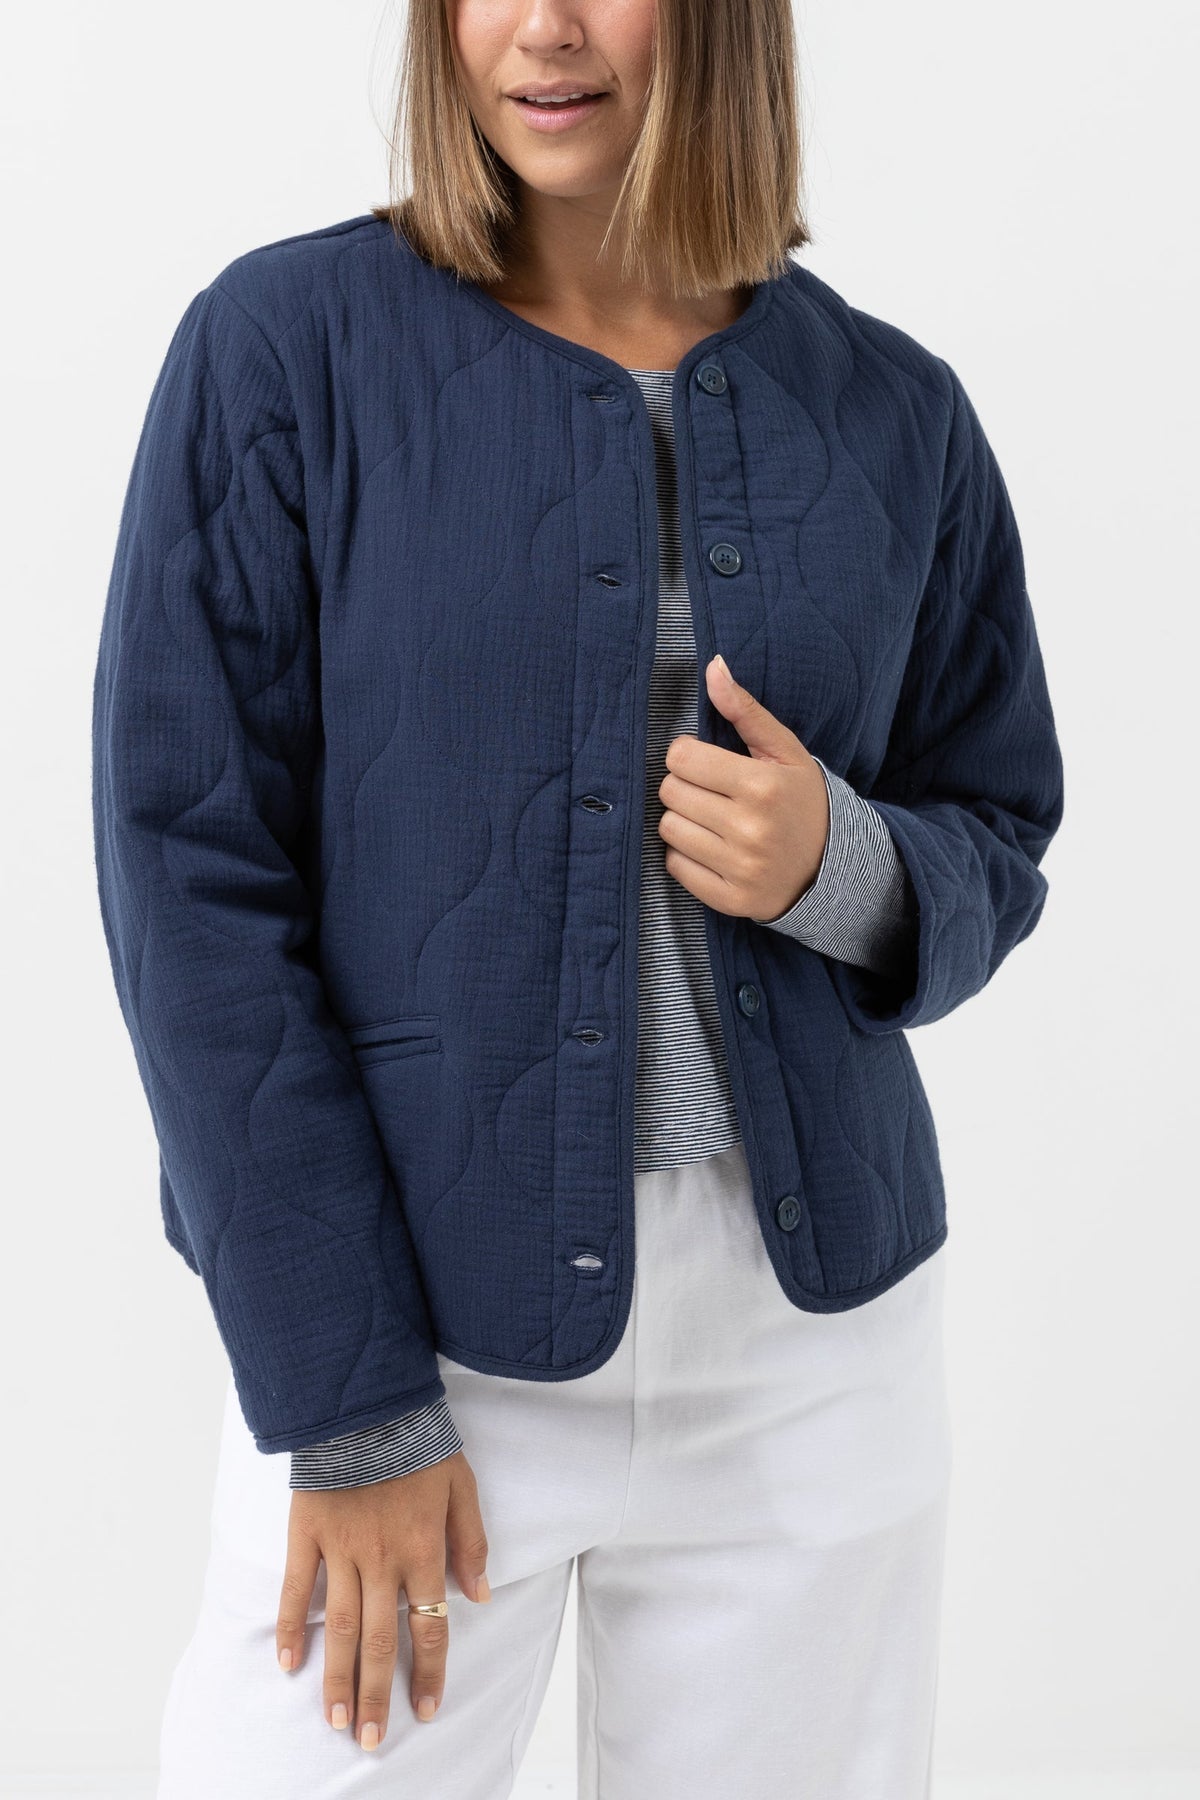 Montauk Quilted Jacket